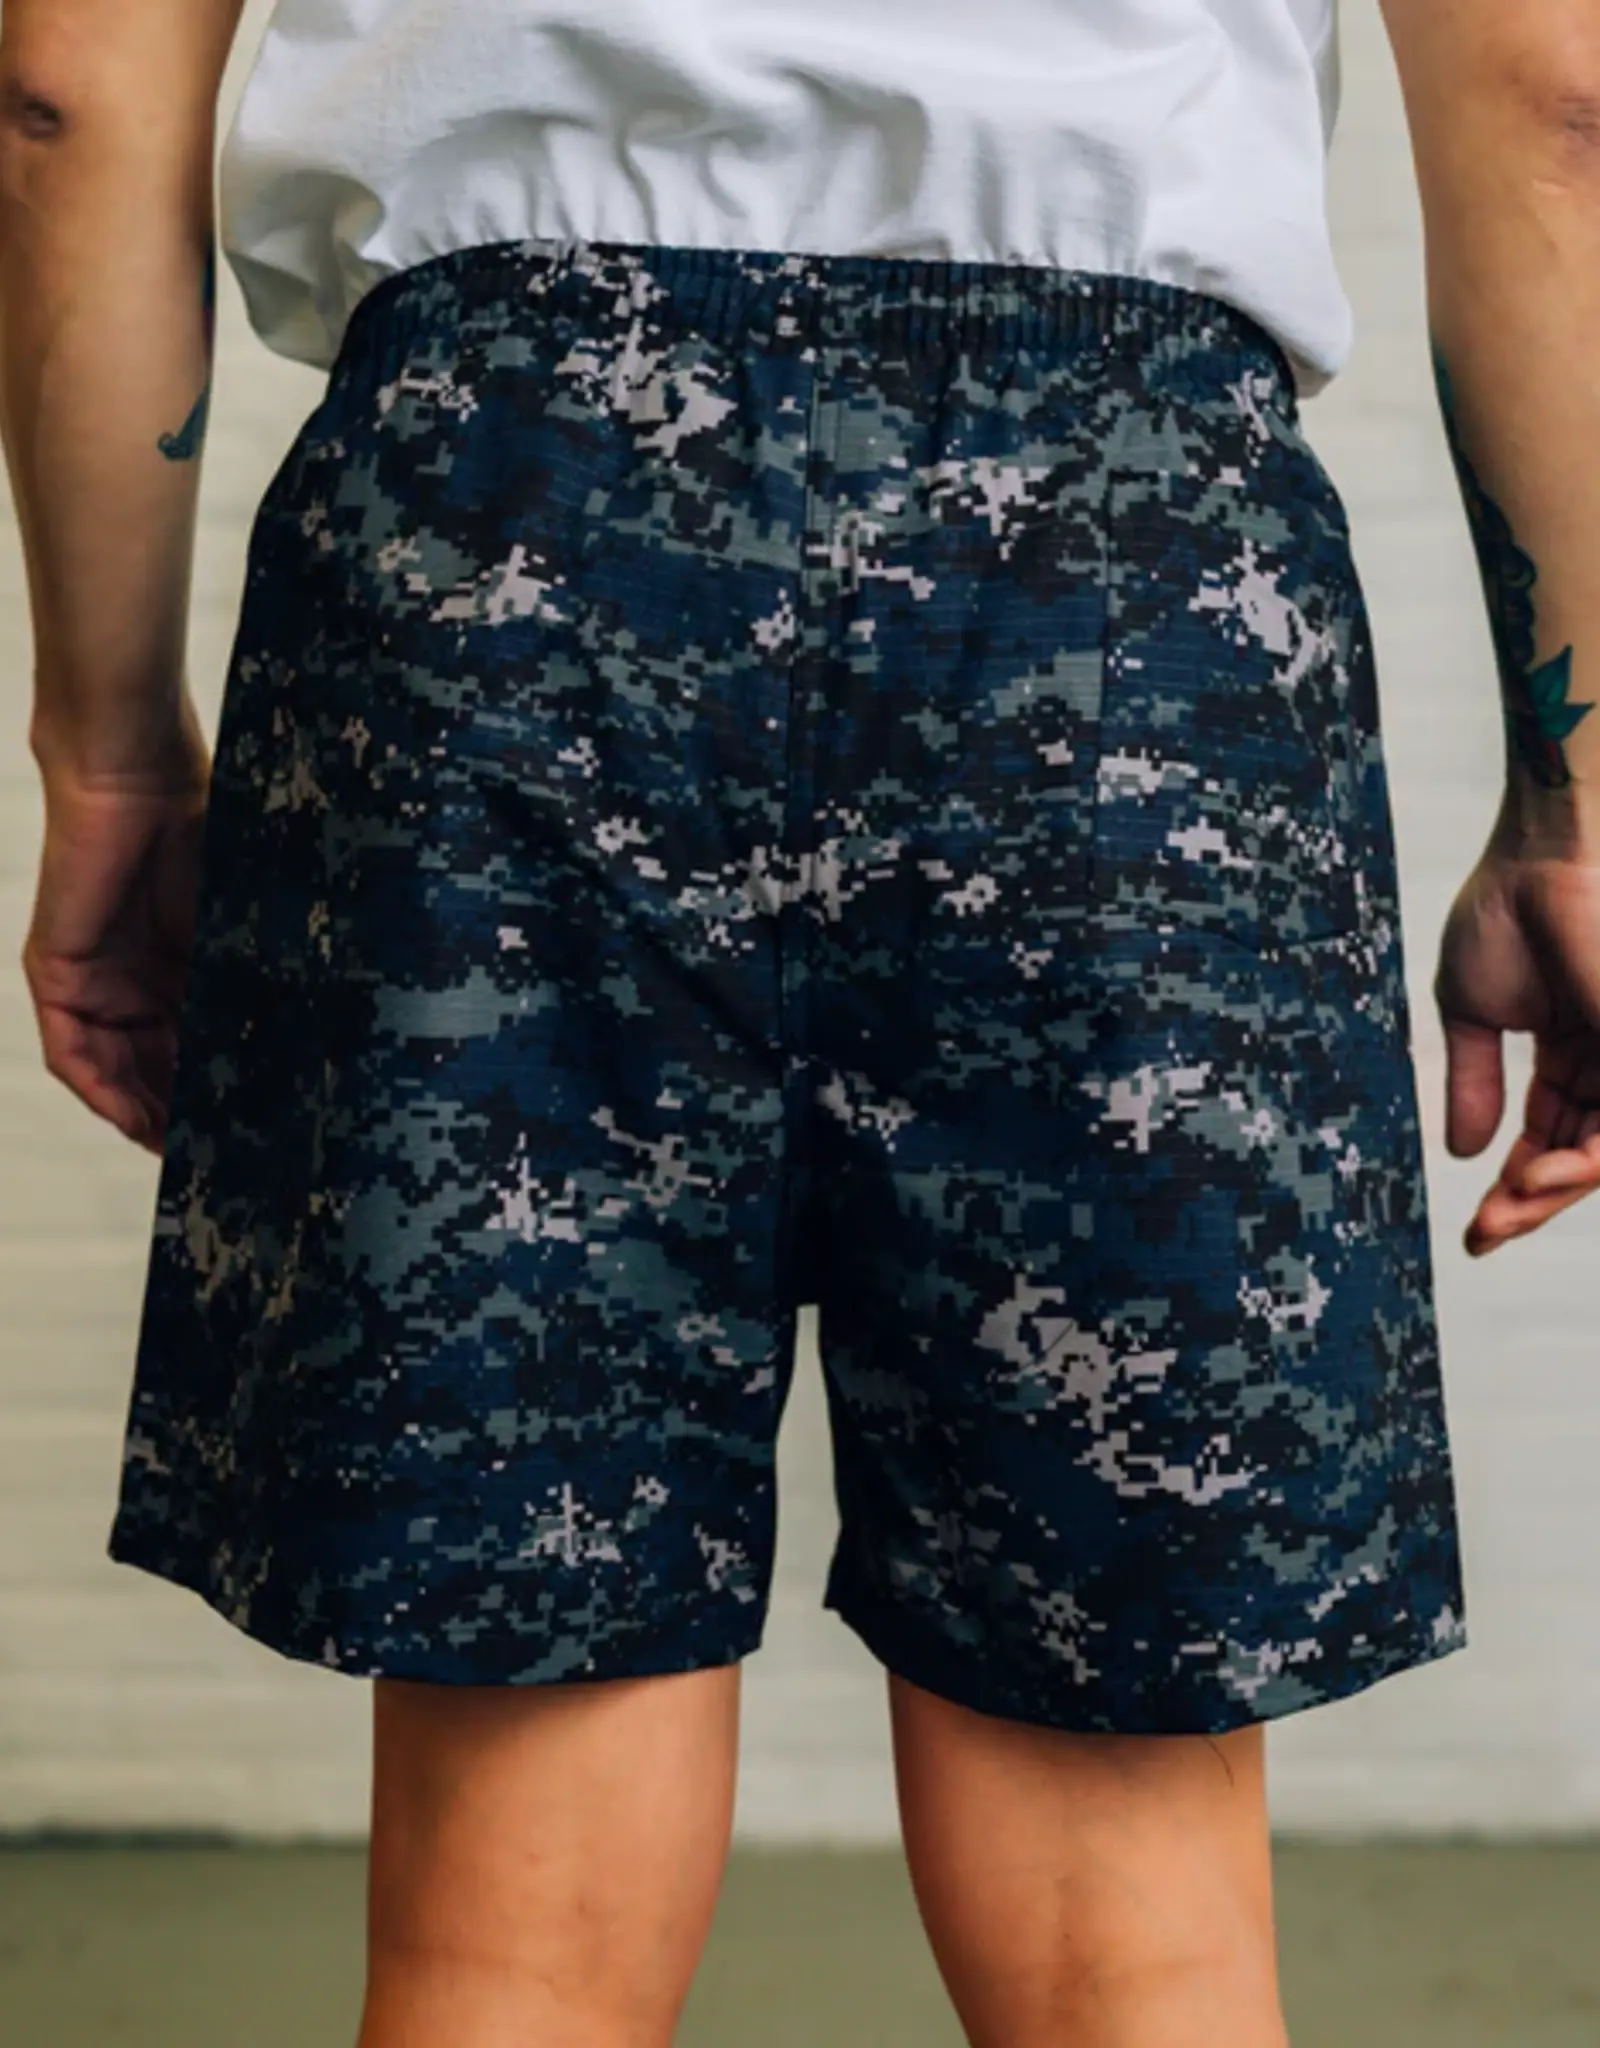 RAISED BY WOLVES RAISED BY WOLVES - BARBARIAN RIPSTOP SHORTS BLUE DIGICAM